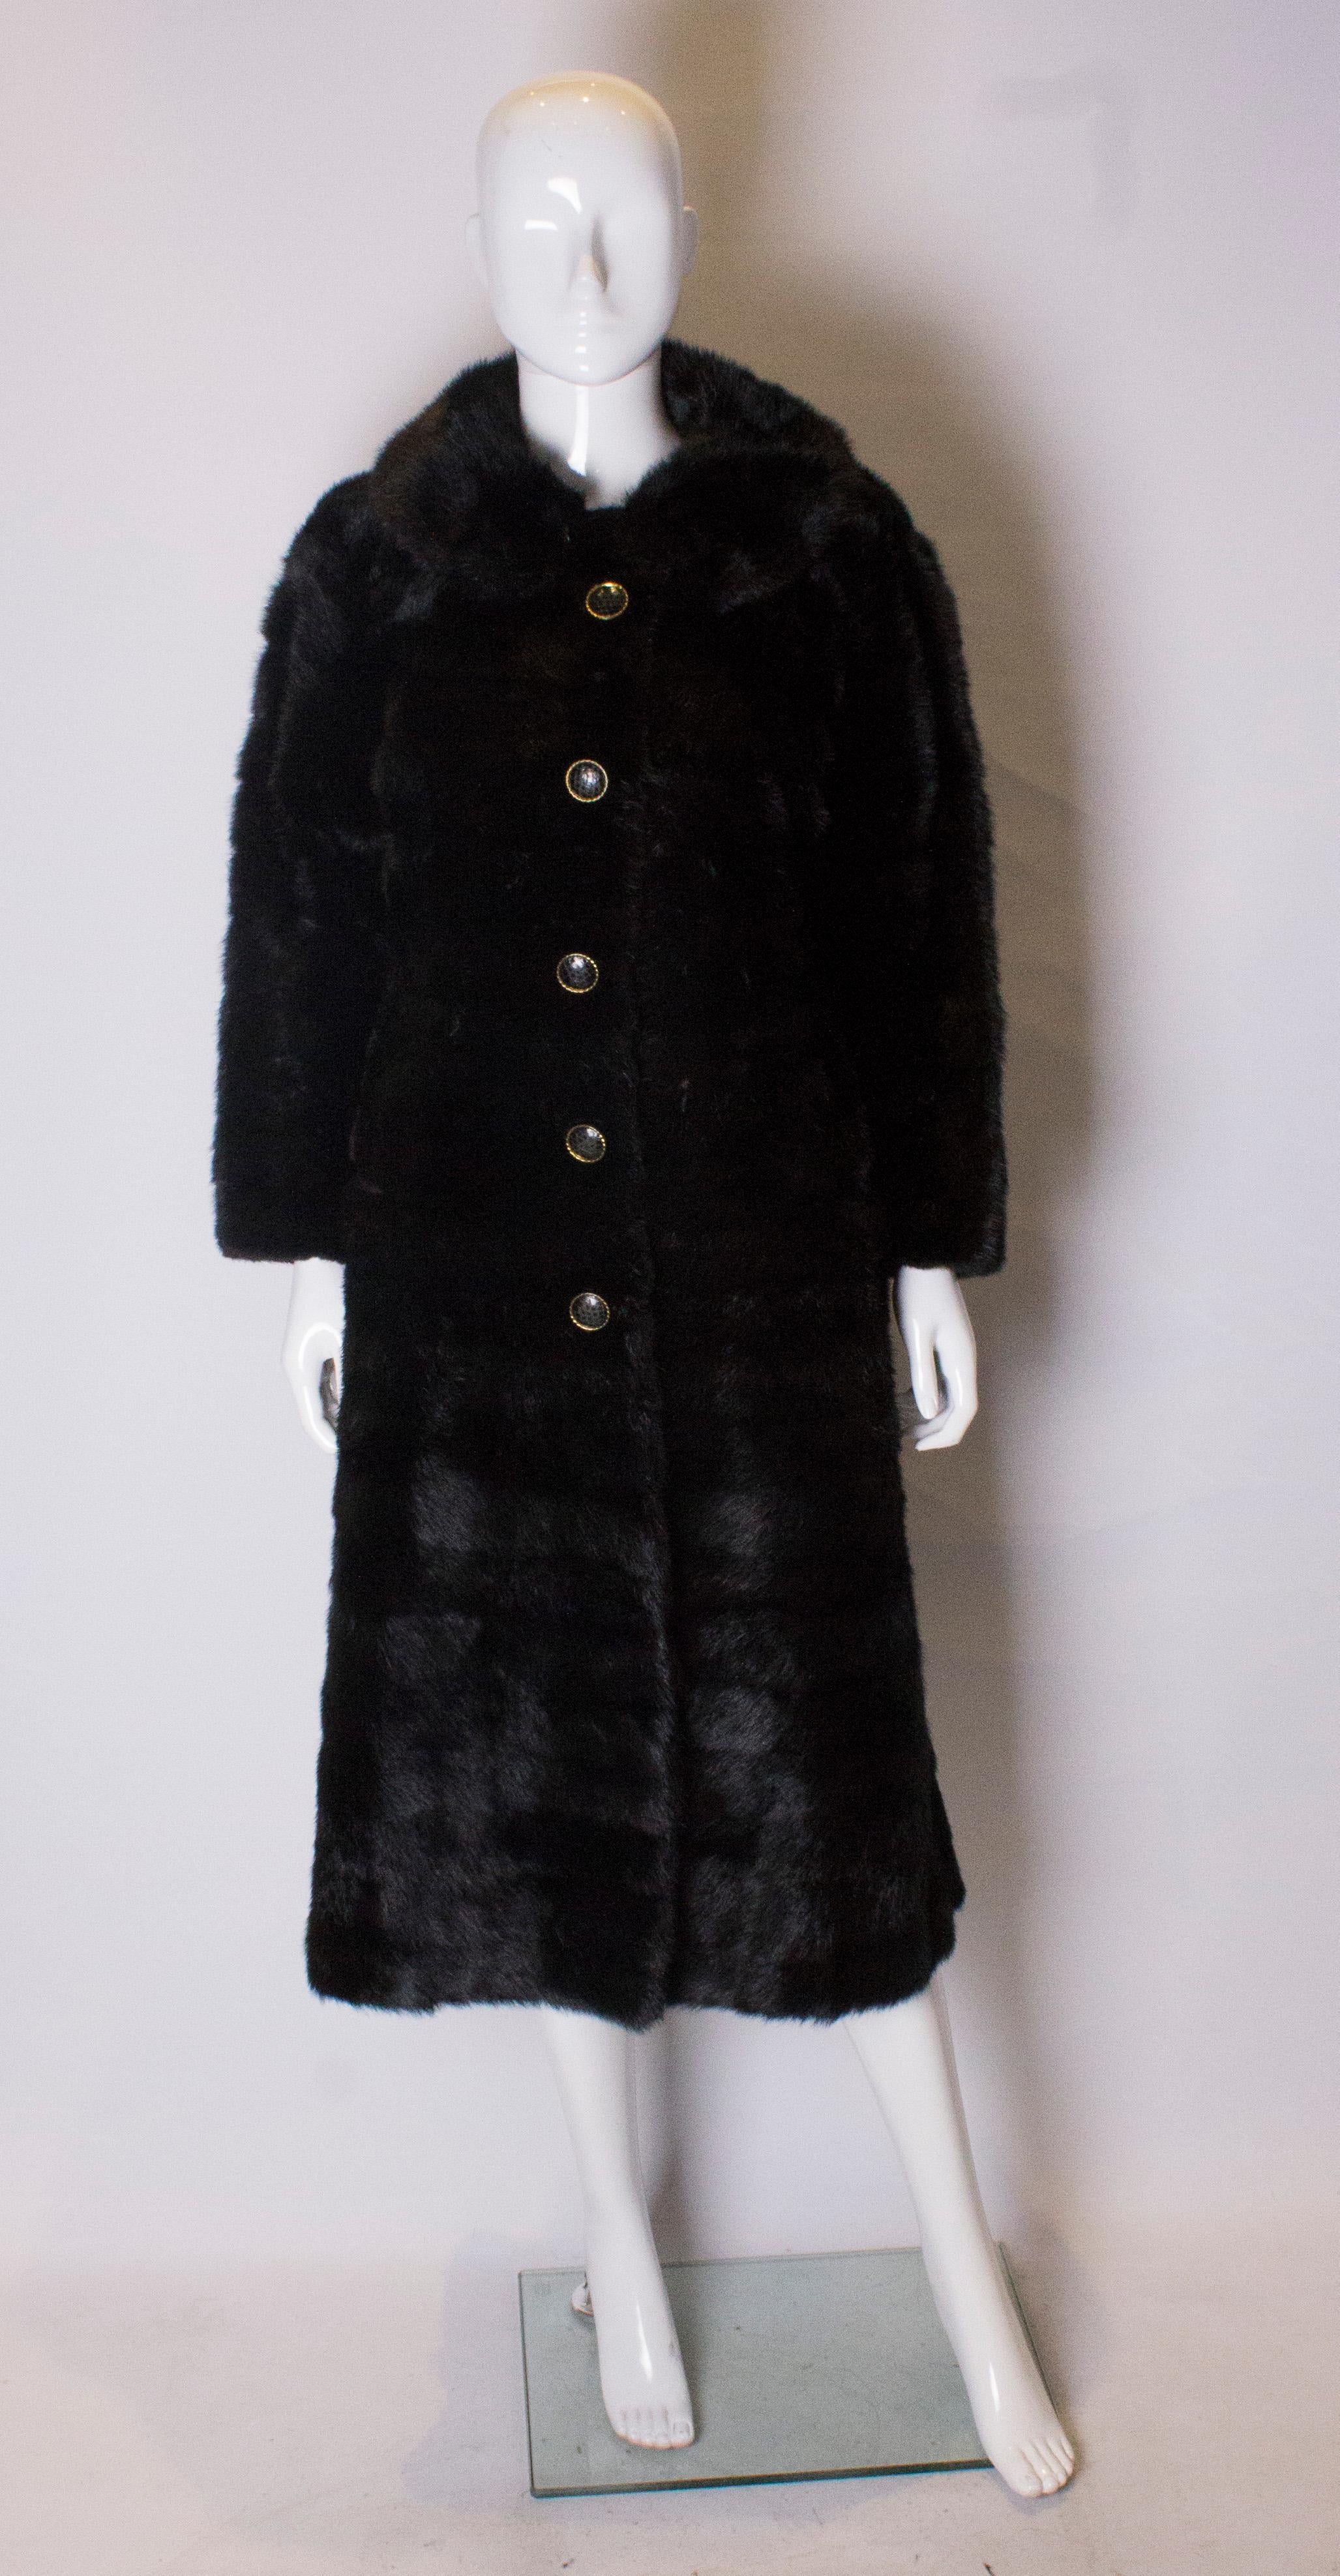 A chic vintage mink coat dating from the late 1960s. The coat has a four hook opening with four decorative buttons. It has a round collar with hook fastening and one pocket on either side at the front, and a half belt at the back. The coat is fully